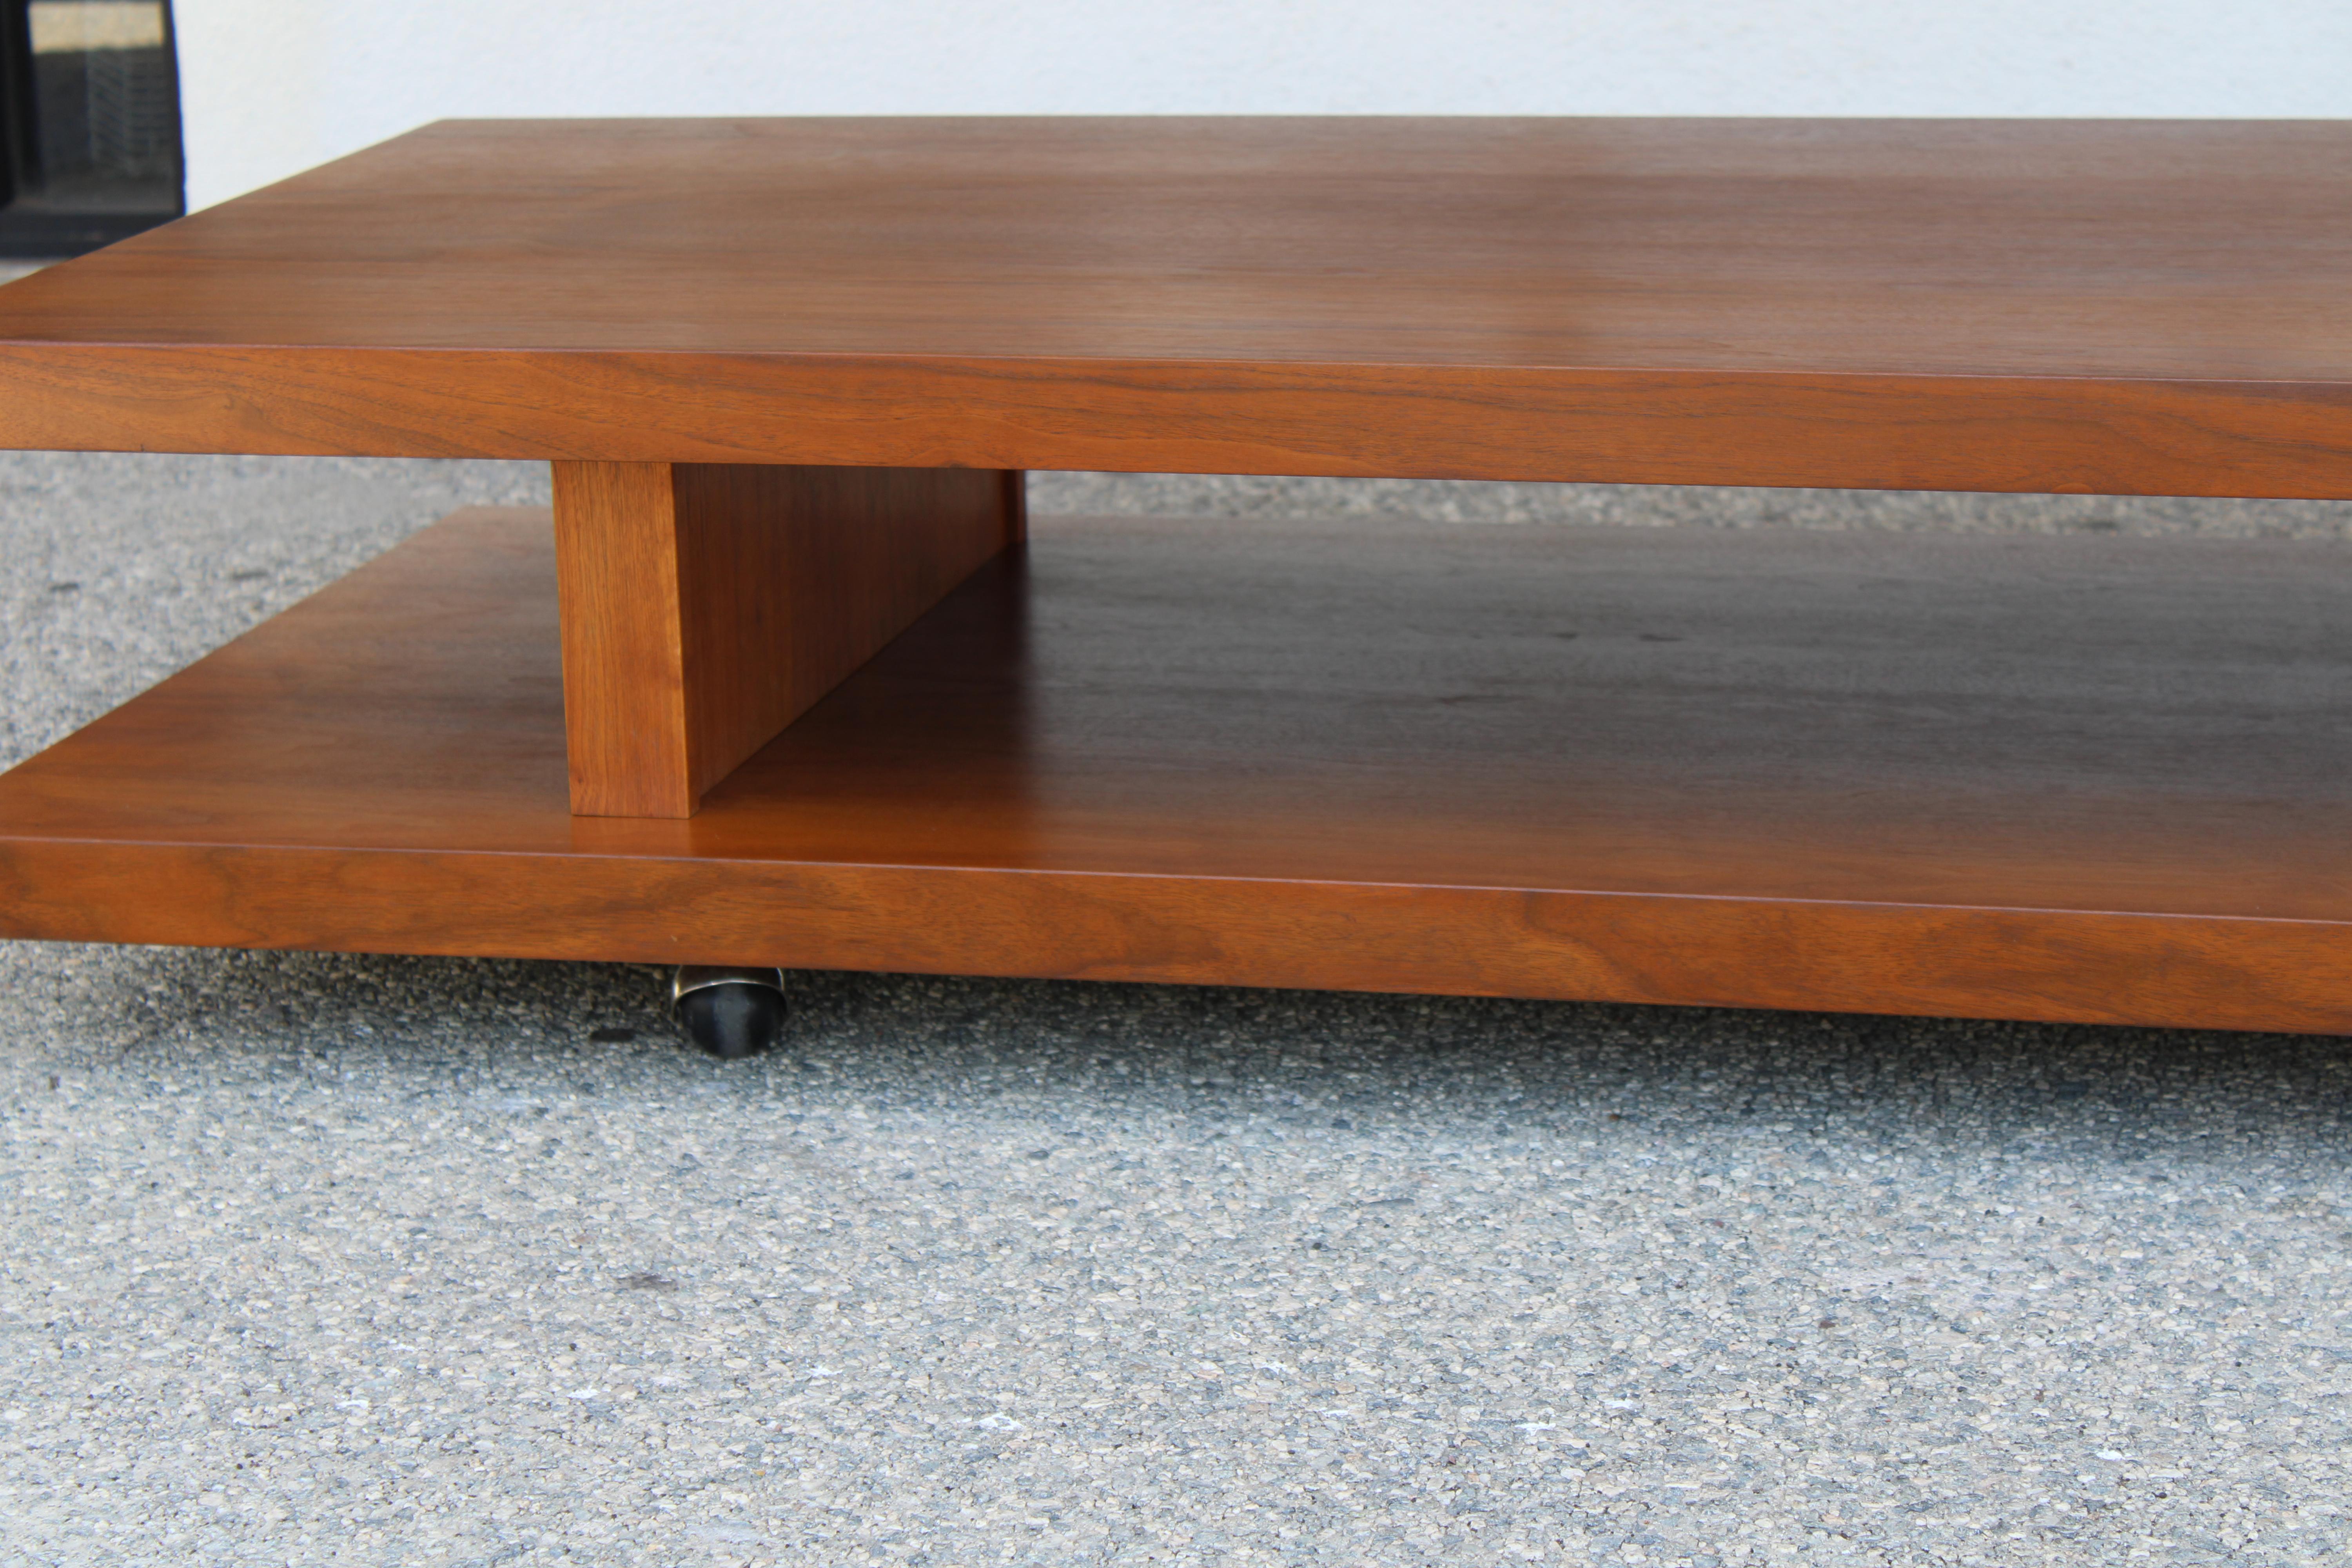 American Two Tier Coffee Table on Rollers, style of Van Keppel Green (VKG), Glass Top For Sale